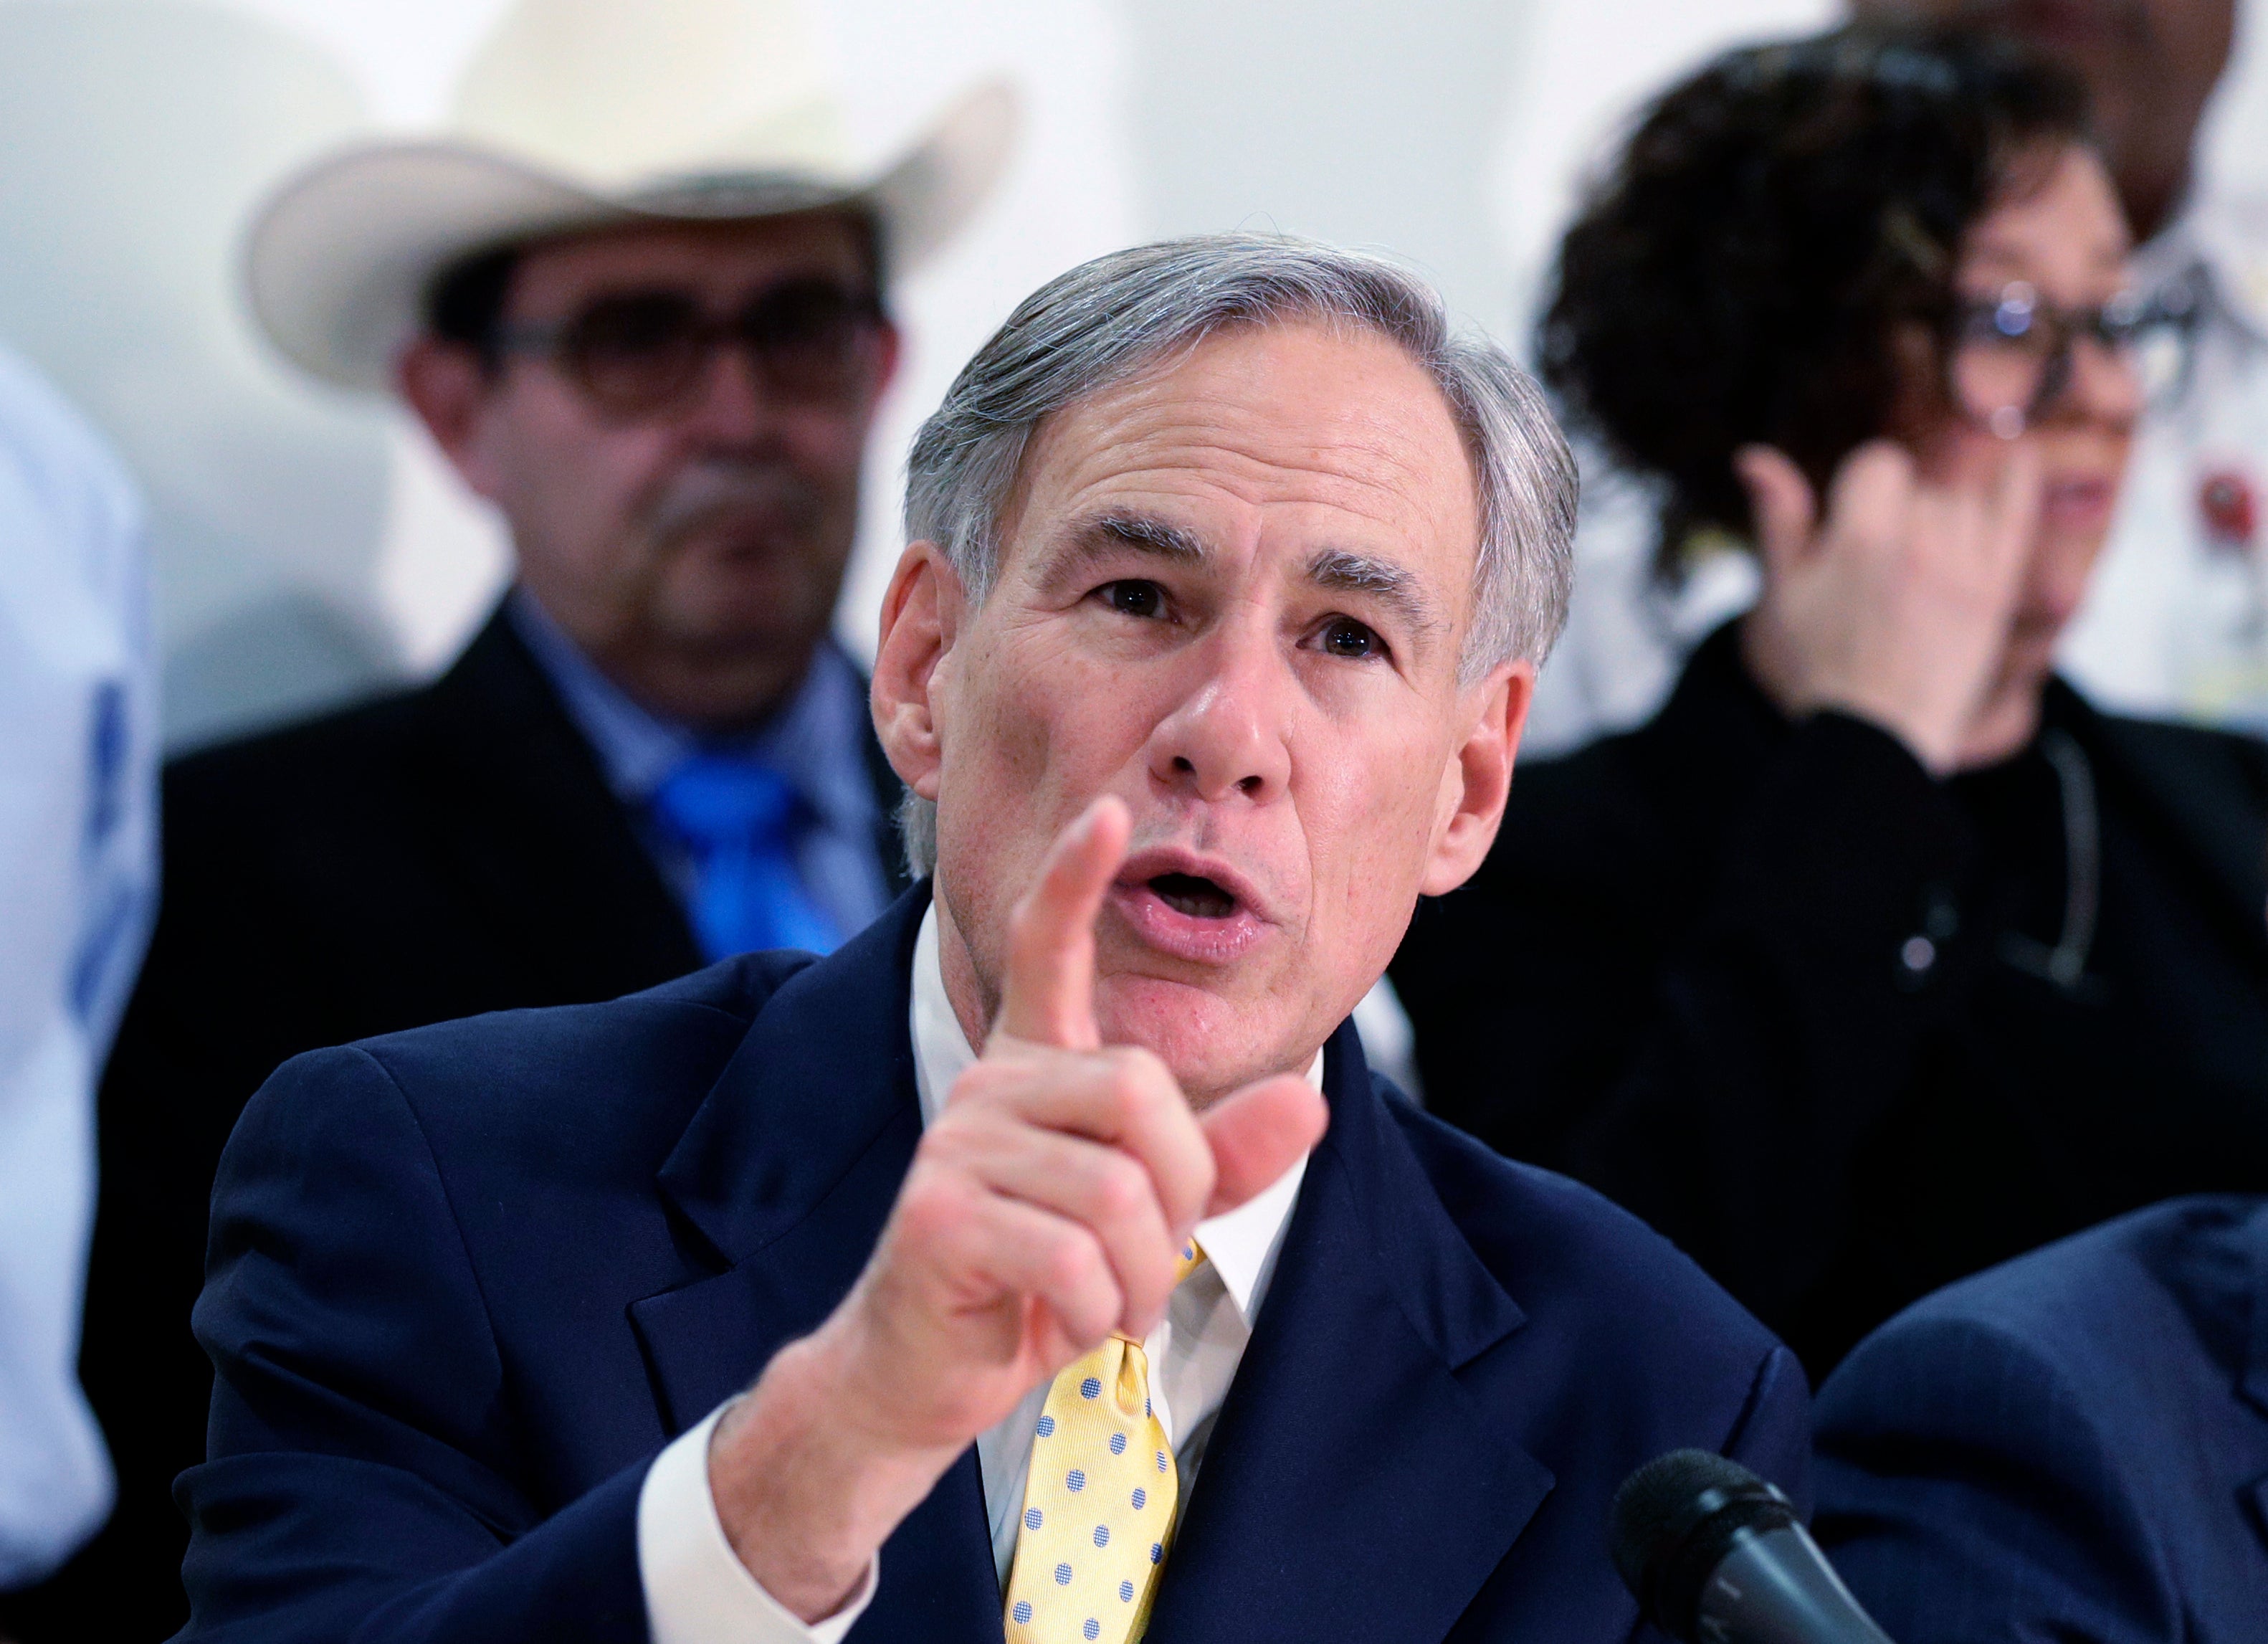 Texas Gov Greg Abbott faces declining poll numbers